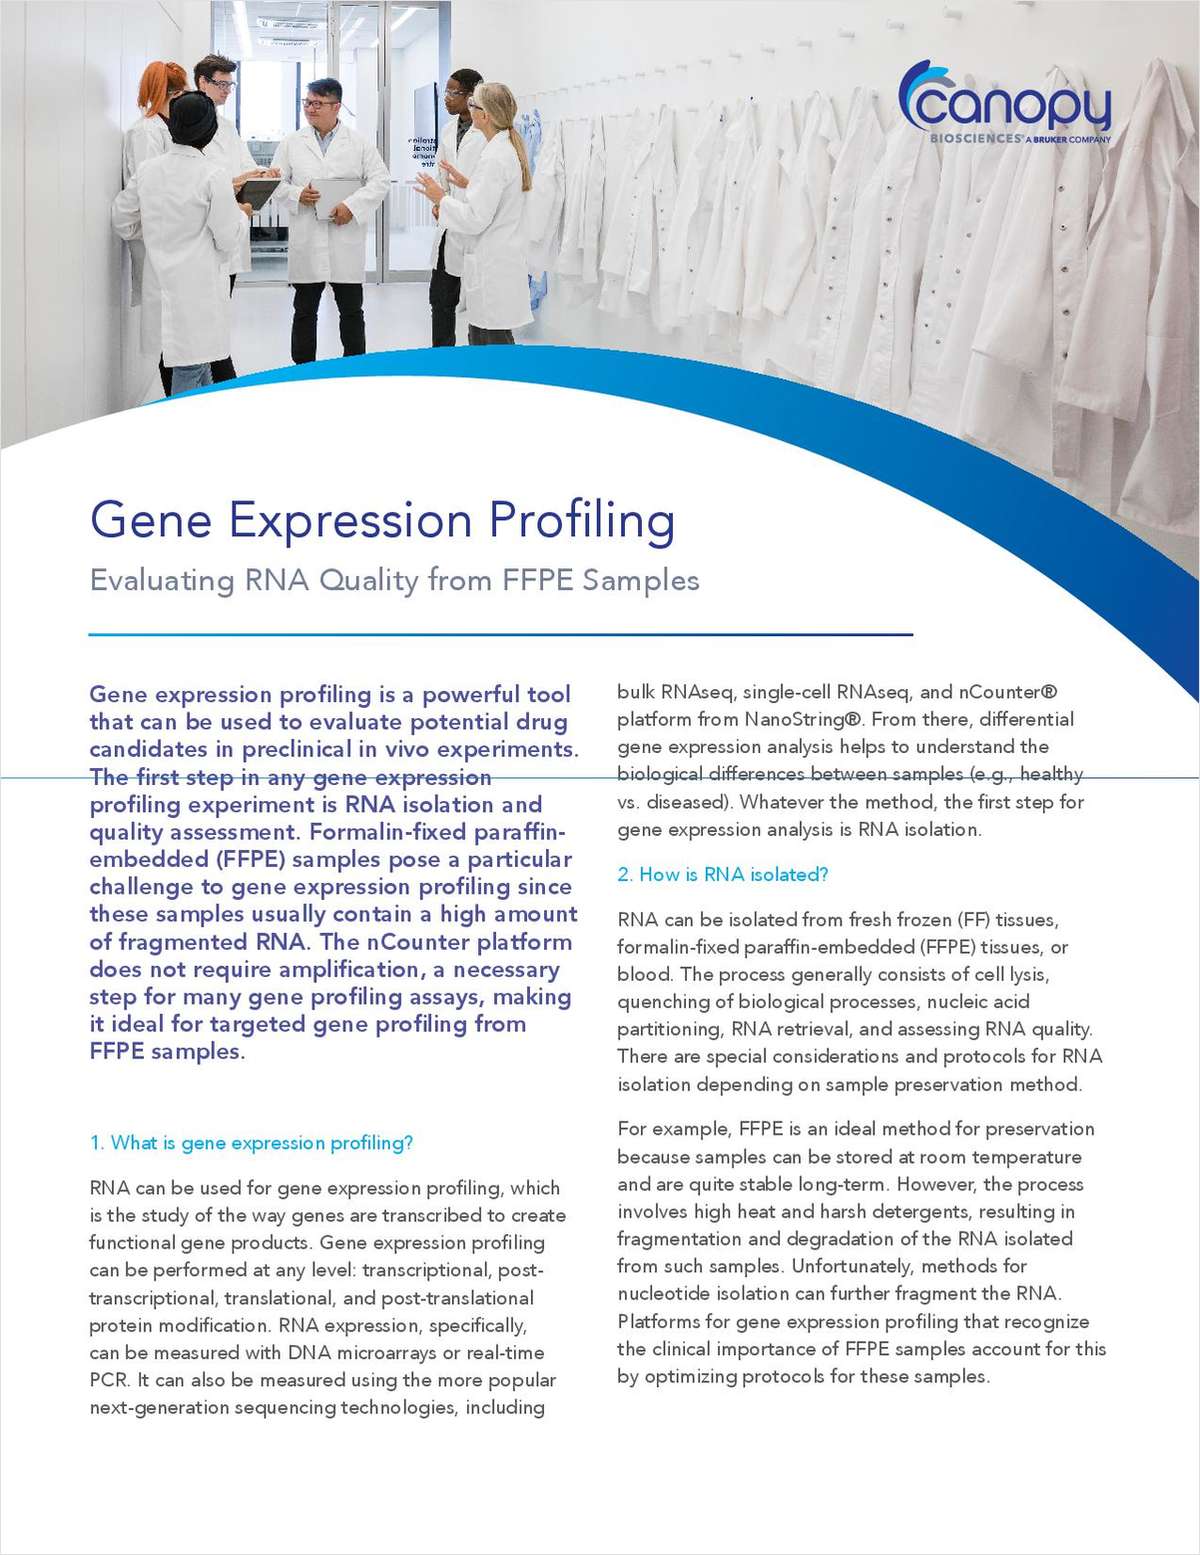 Gene Expression Profiling: Evaluating RNA Quality from FFPE Samples